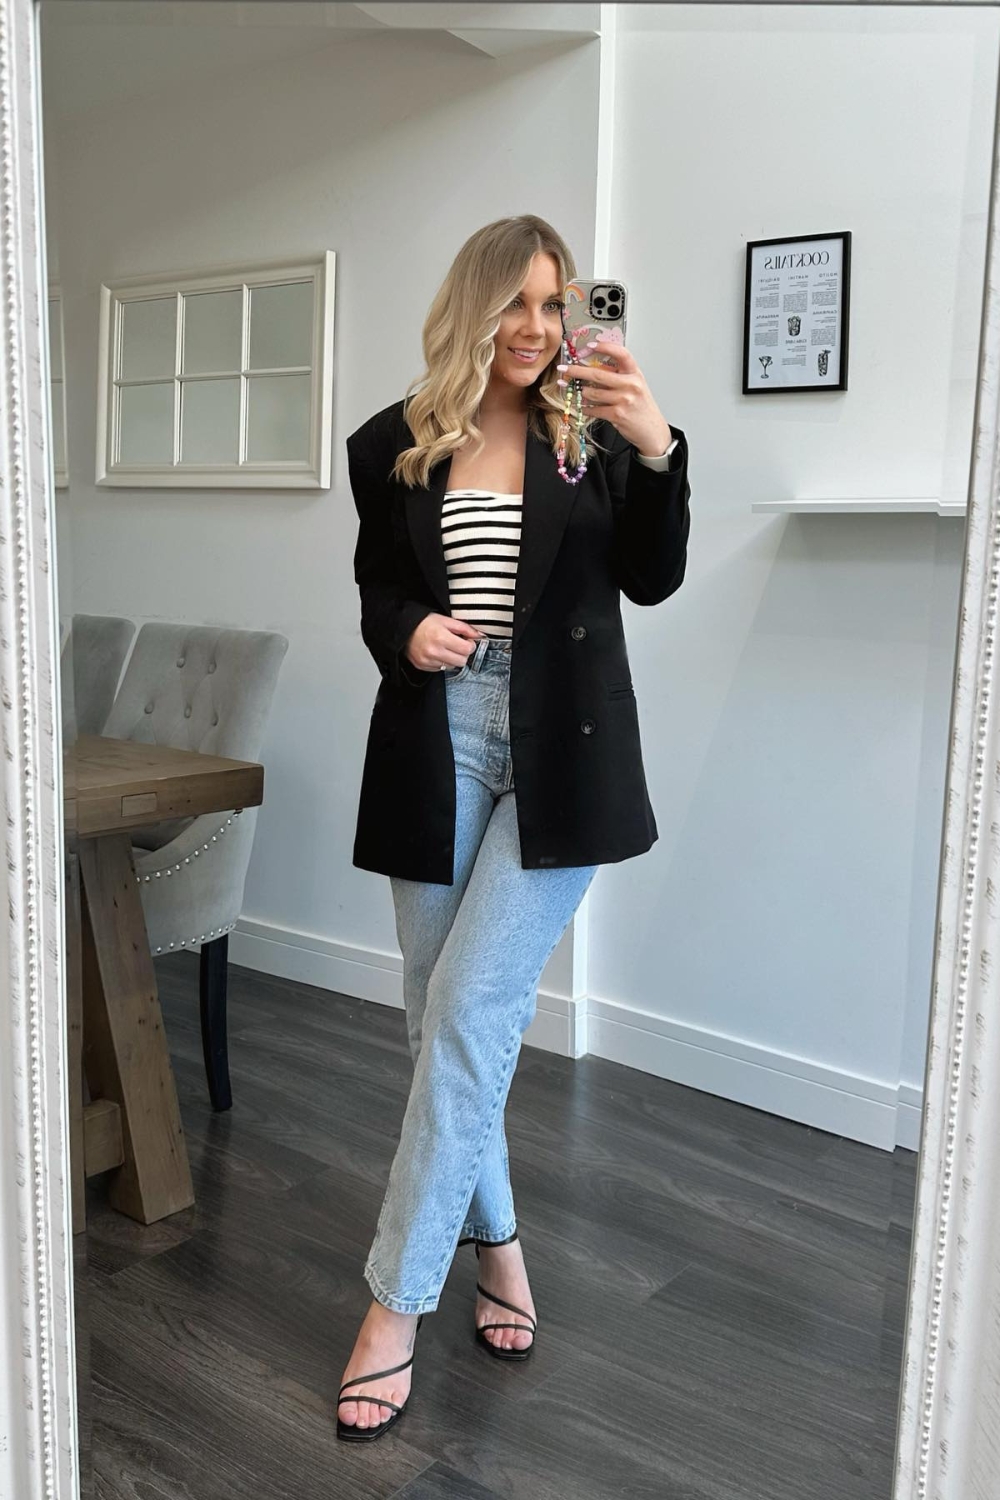 Black blazer with jeans and striped tee outfit for work